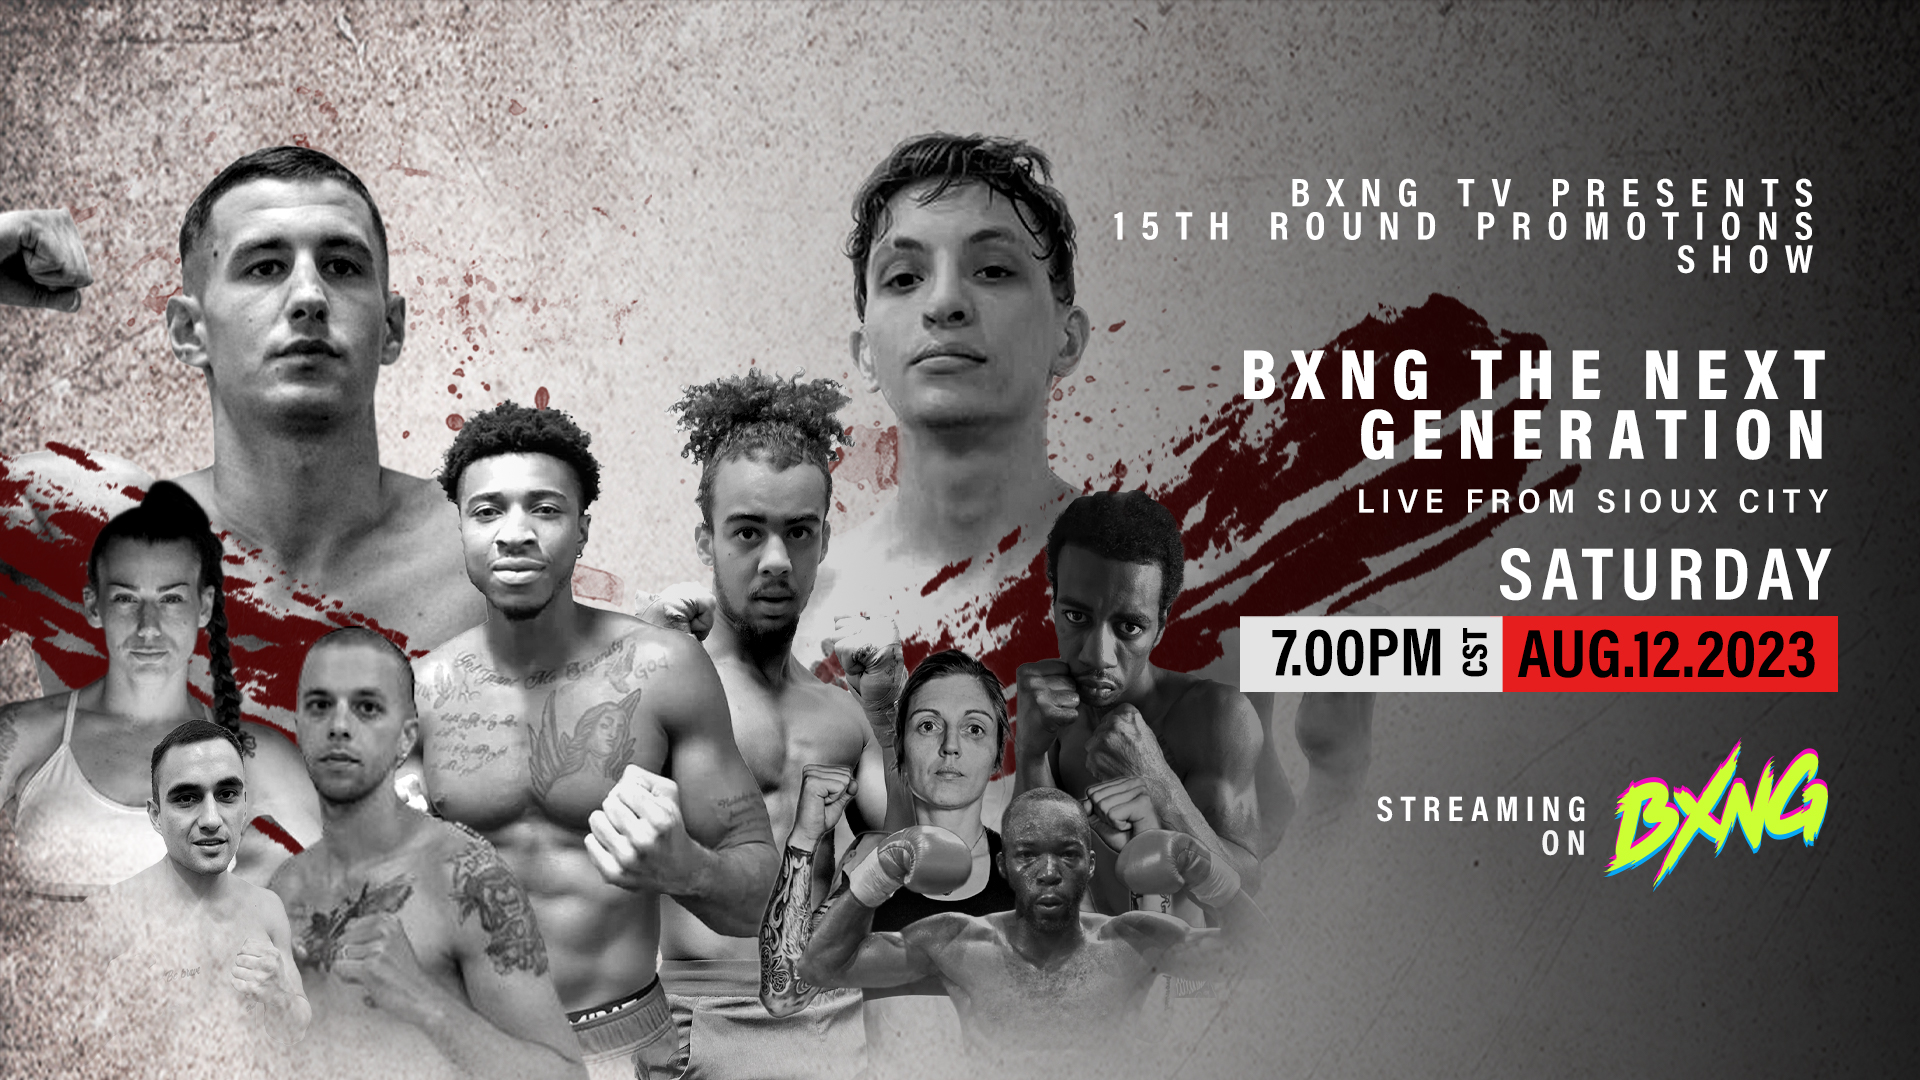 BXNG TV Presents 15th Round Promotions Show Live Stream 08/12/23